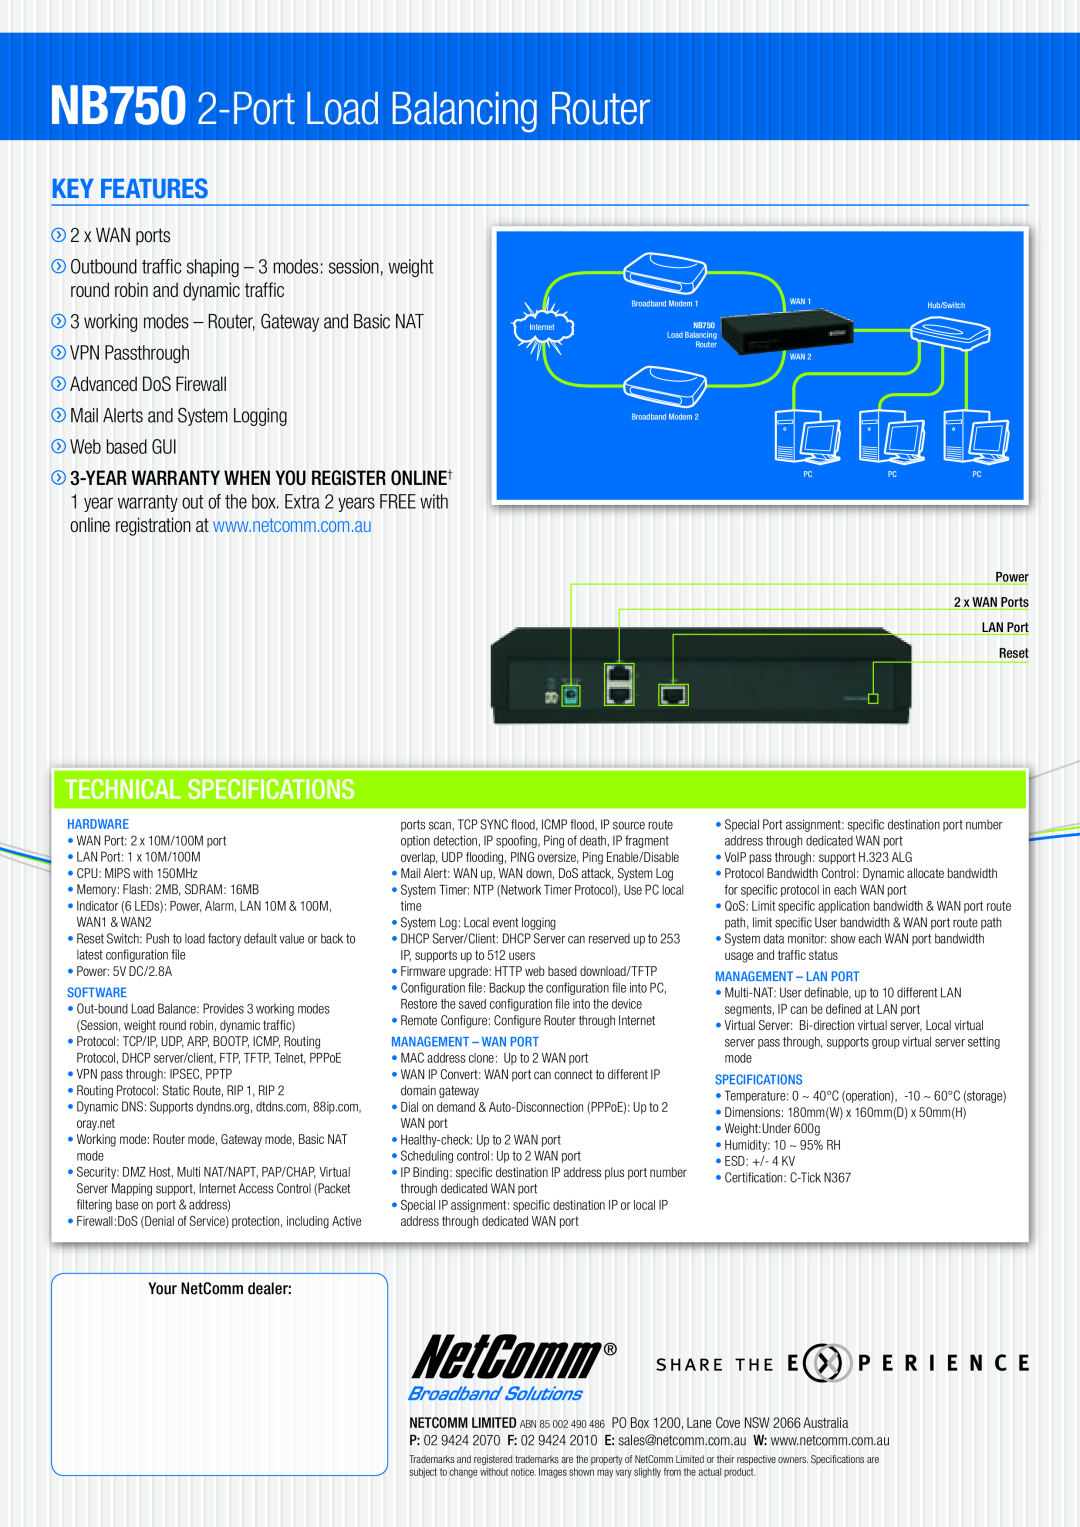 NetComm NB750 2-Port Load Balancing Router, Your NetComm dealer, Key Features, Technical Specifications, x WAN ports 